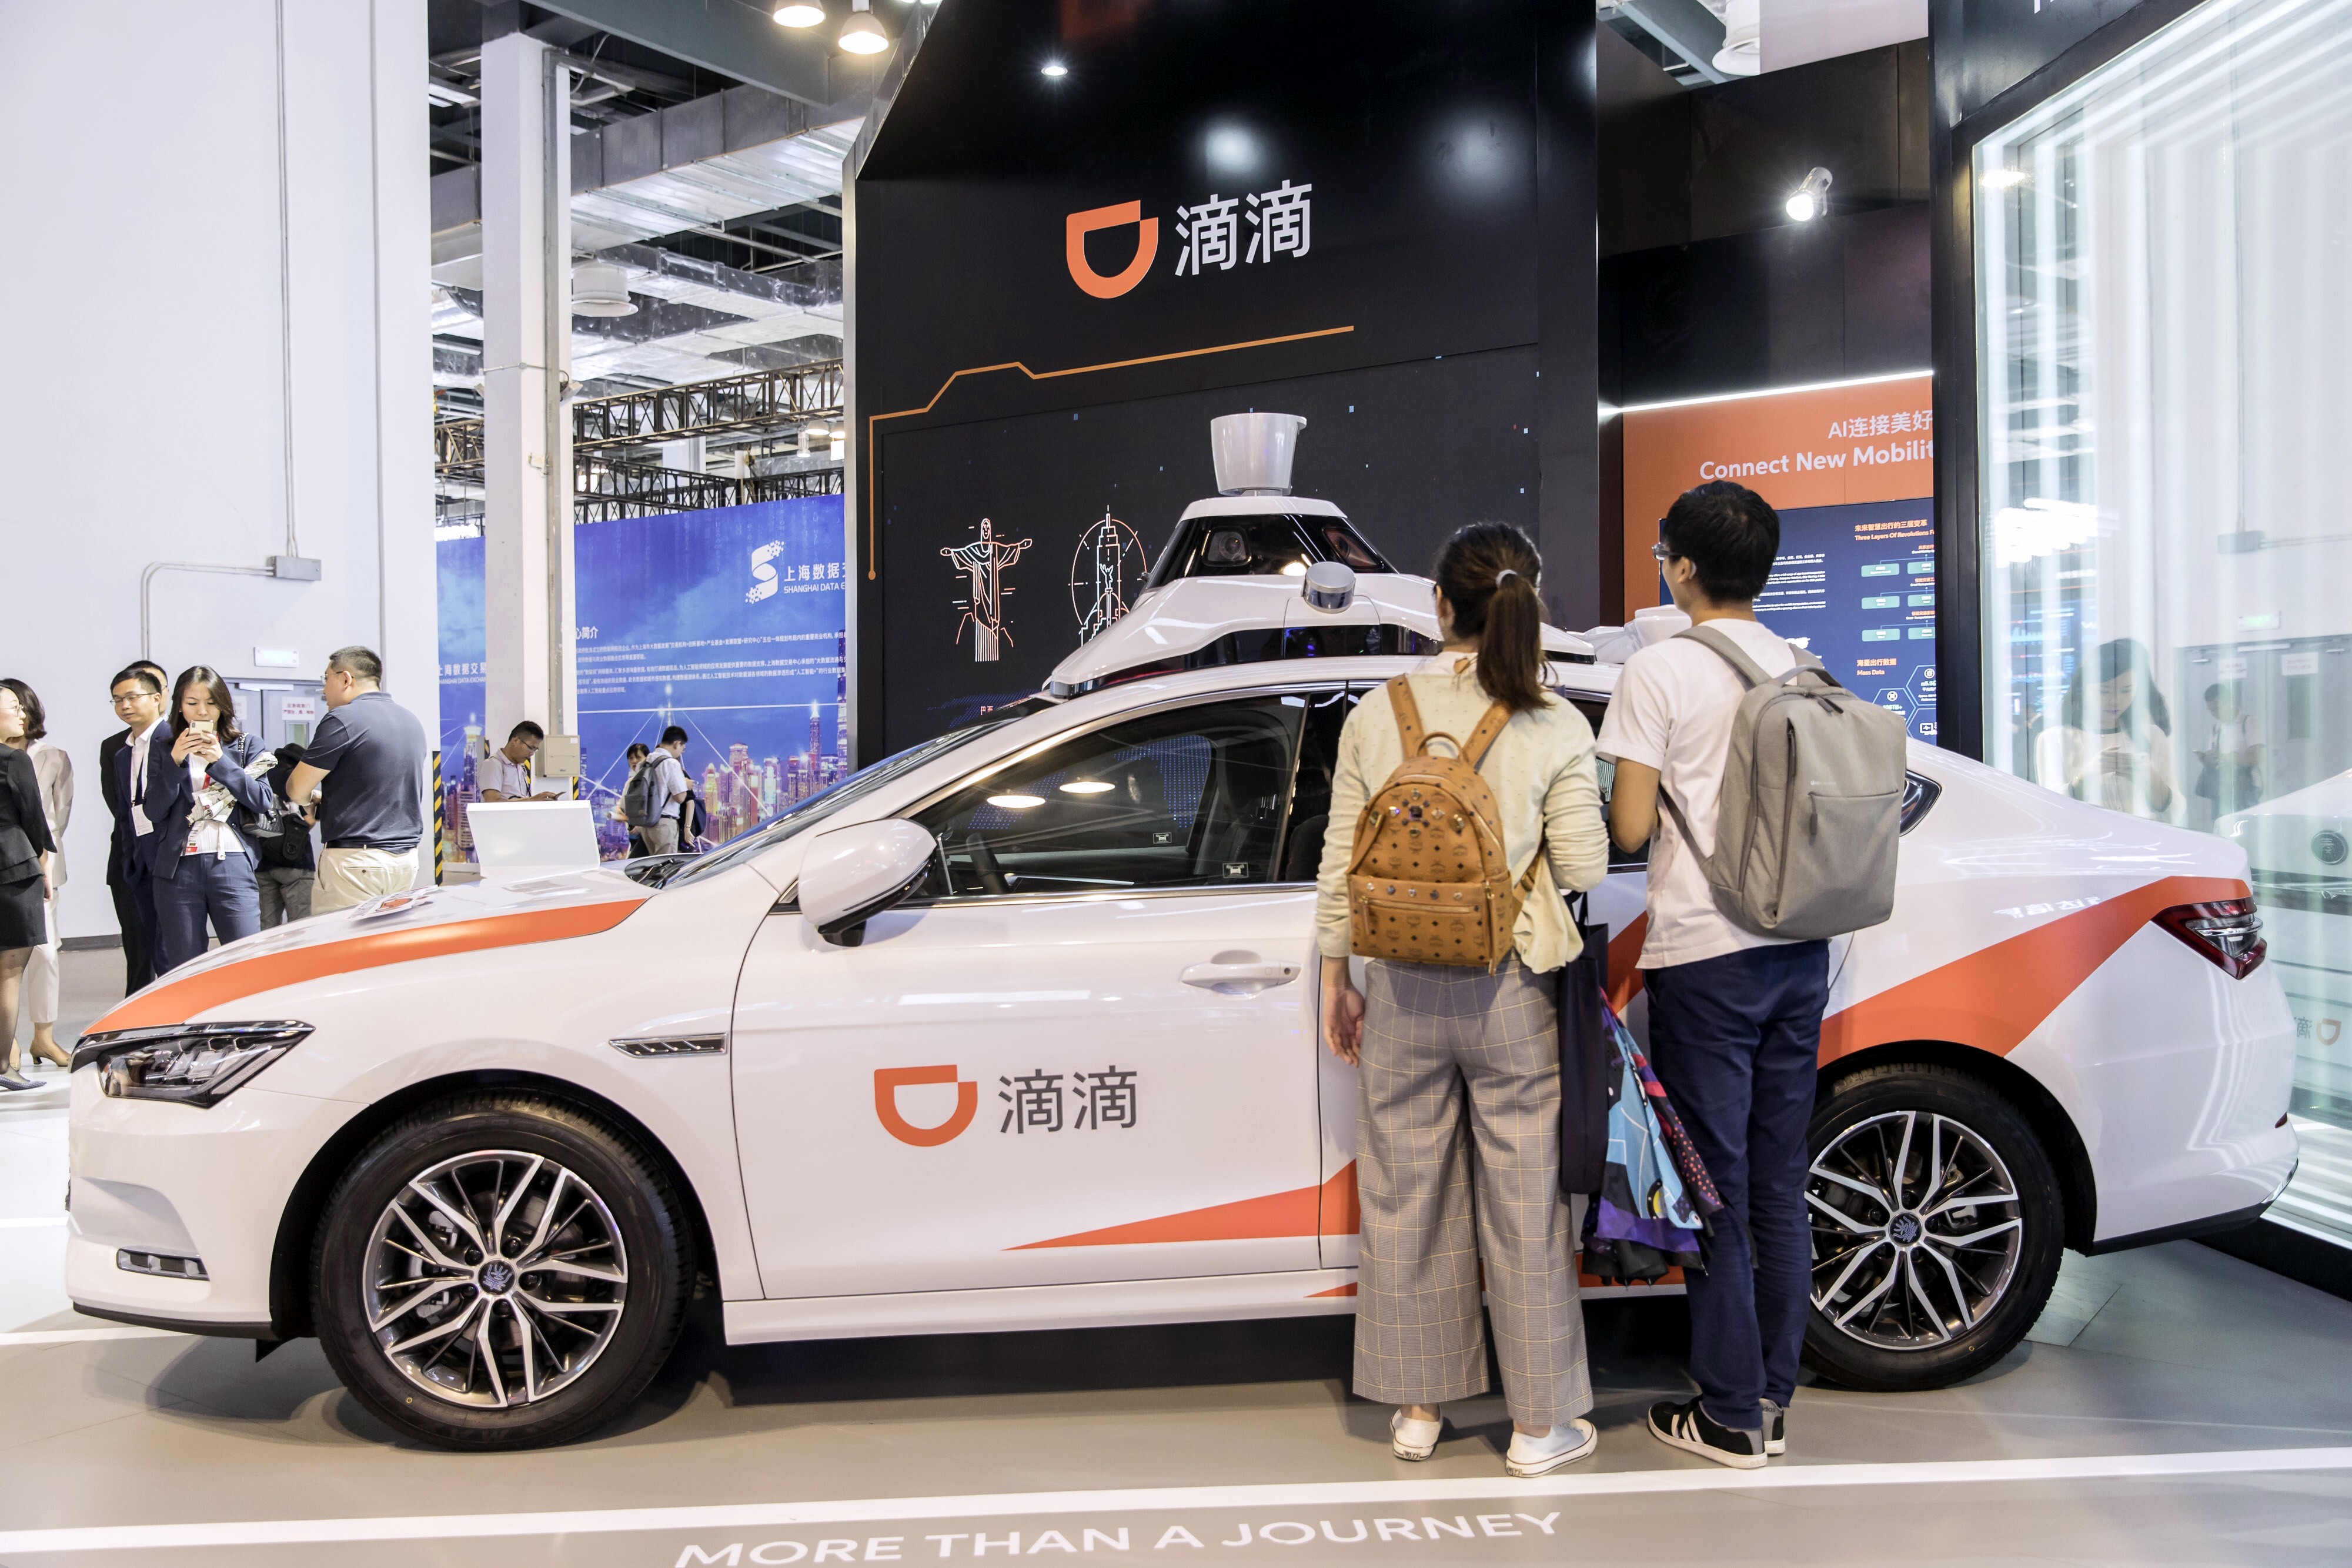 An autonomous vehicle branded with Didi Chuxing’s sign at the World Artificial Intelligence Conference (WAIC) in Shanghai on Thursday, August 29, 2019. Photo: Bloomberg